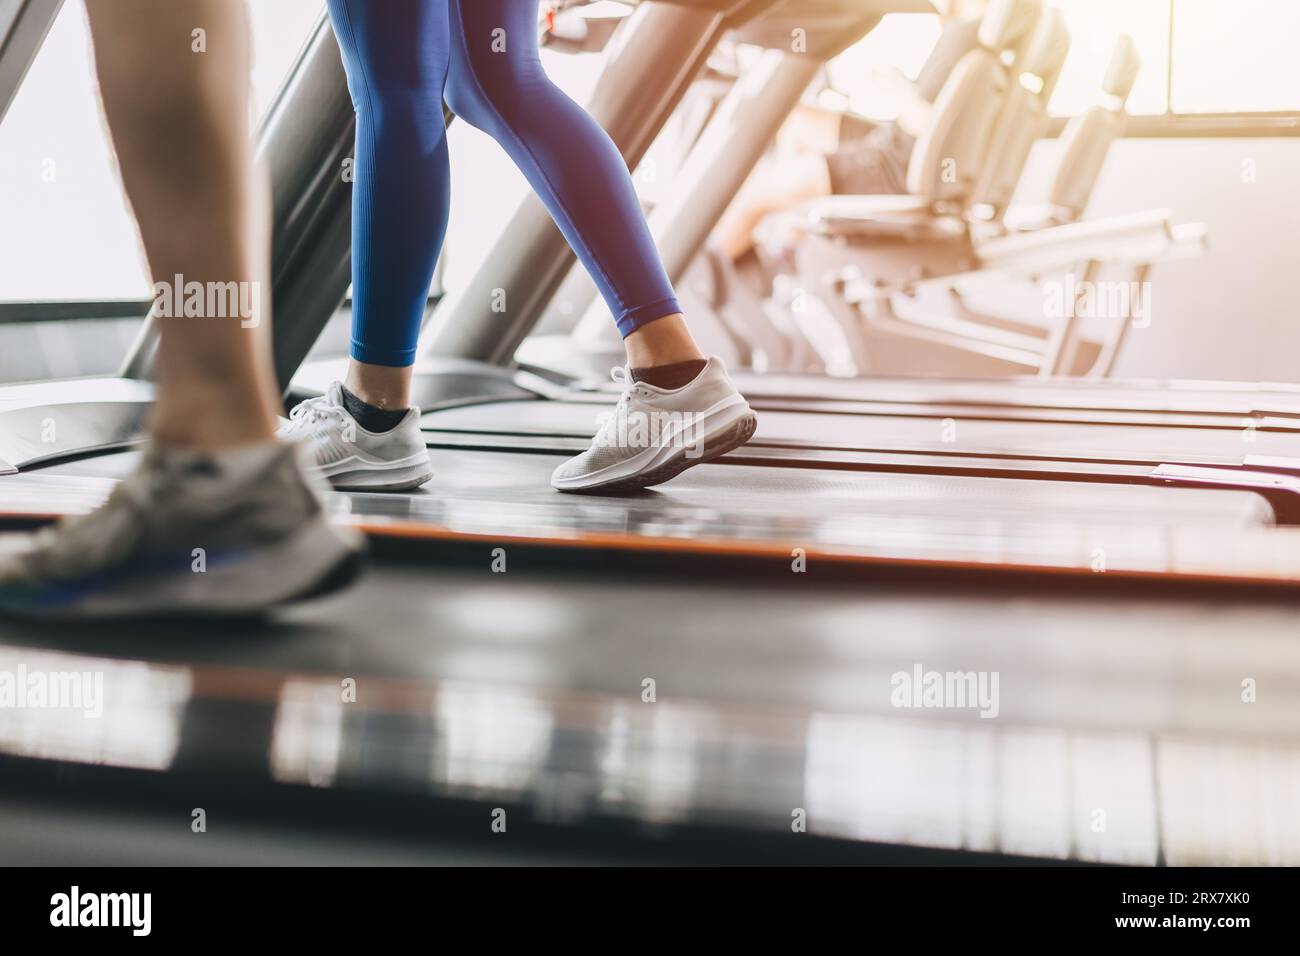 People running on a treadmill in health club. Sport fitness healthcare and healthy lifestyle concept. Stock Photo